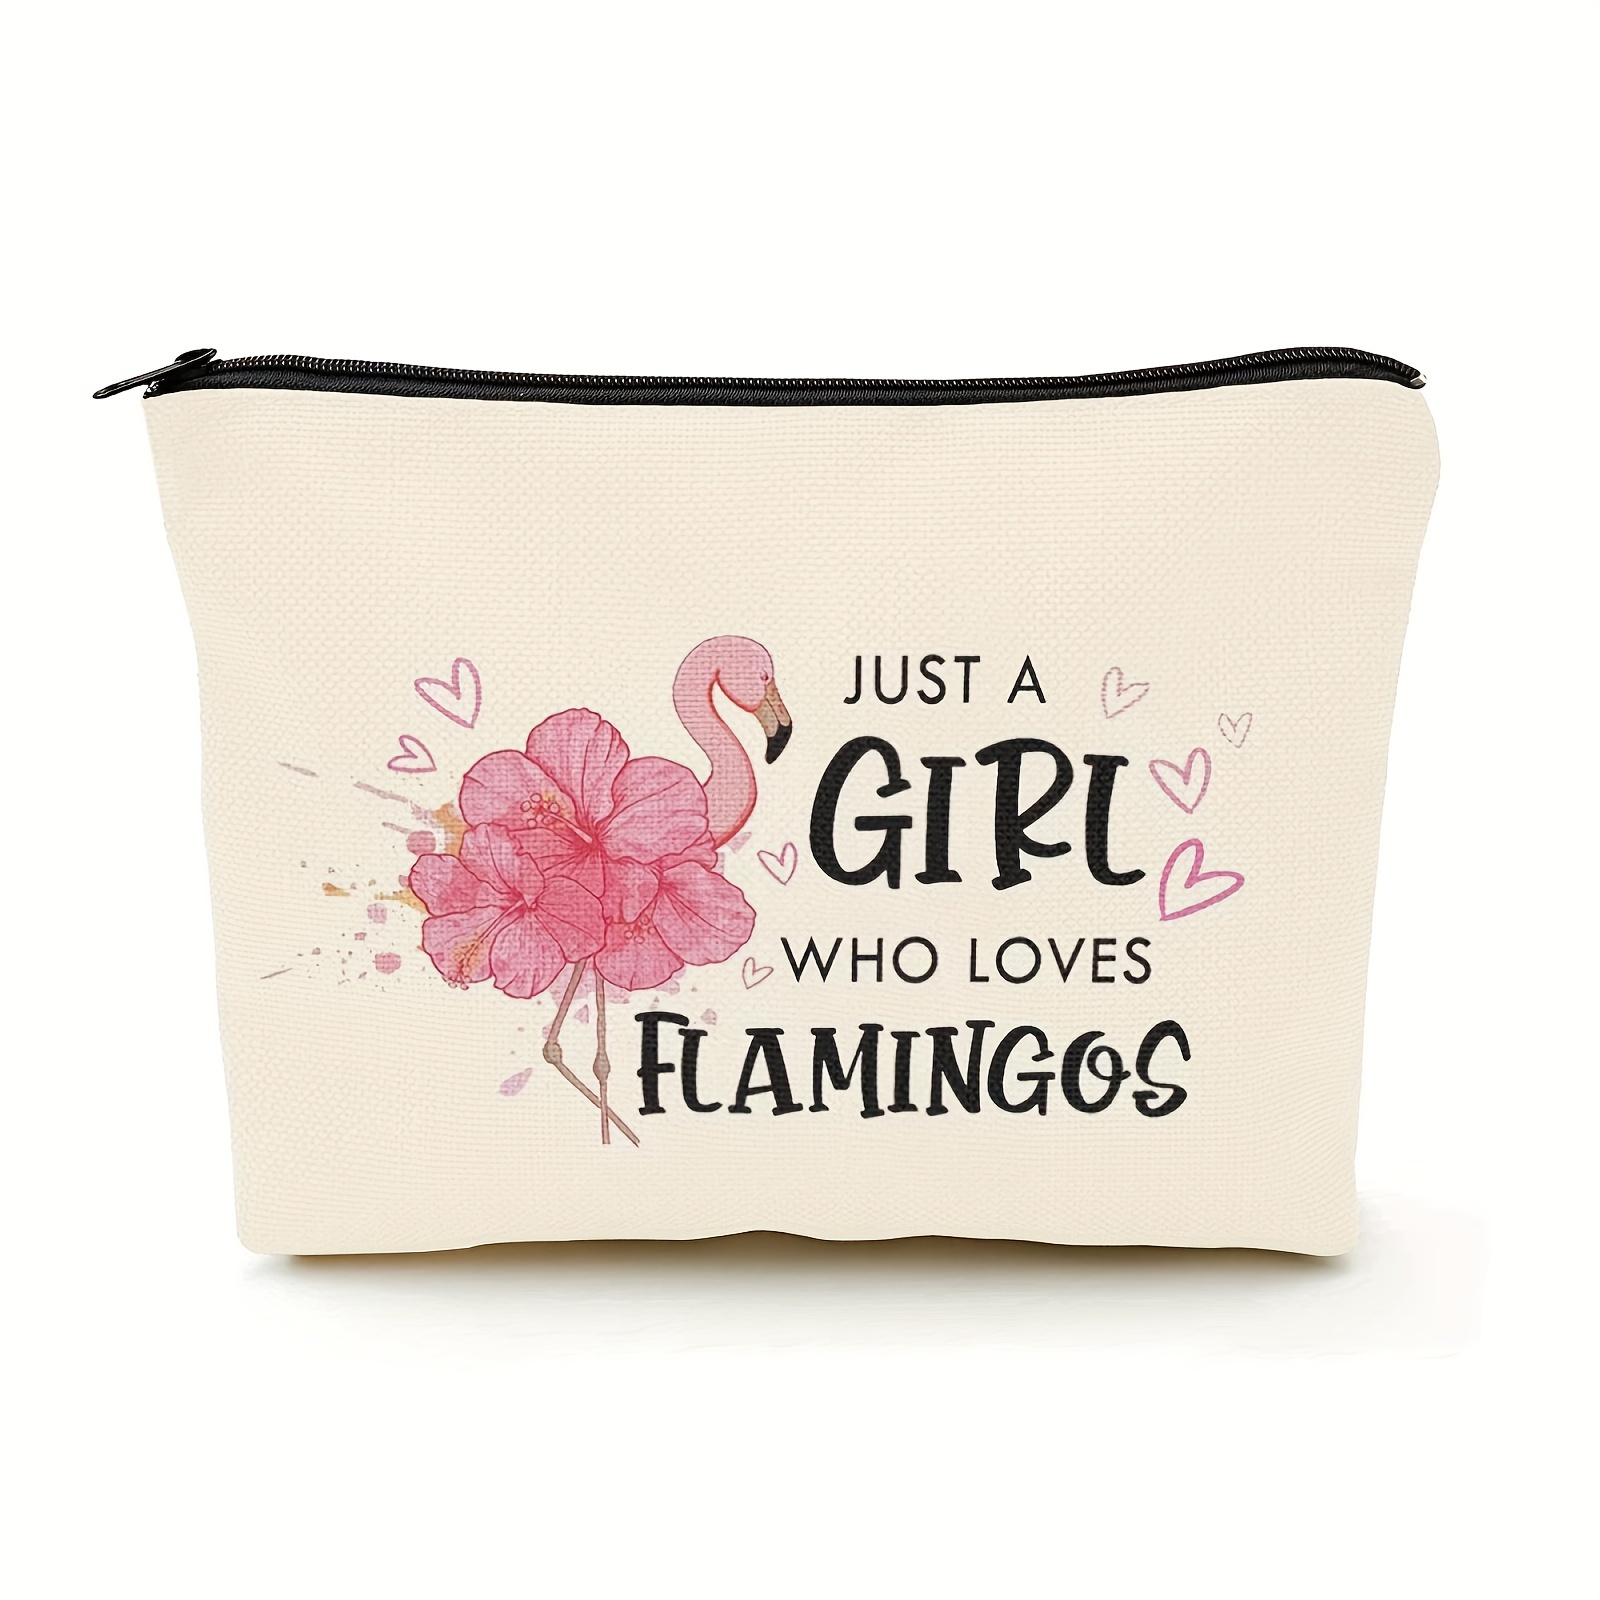 

Flamingos Gifts For Flamingo Lovers, Birthday Gift For Best Friend Sister, Flamingo Accessories, Animal Lovers Makeup Bag Zipper Purse, Who Loves Flamingos Makeup Bag